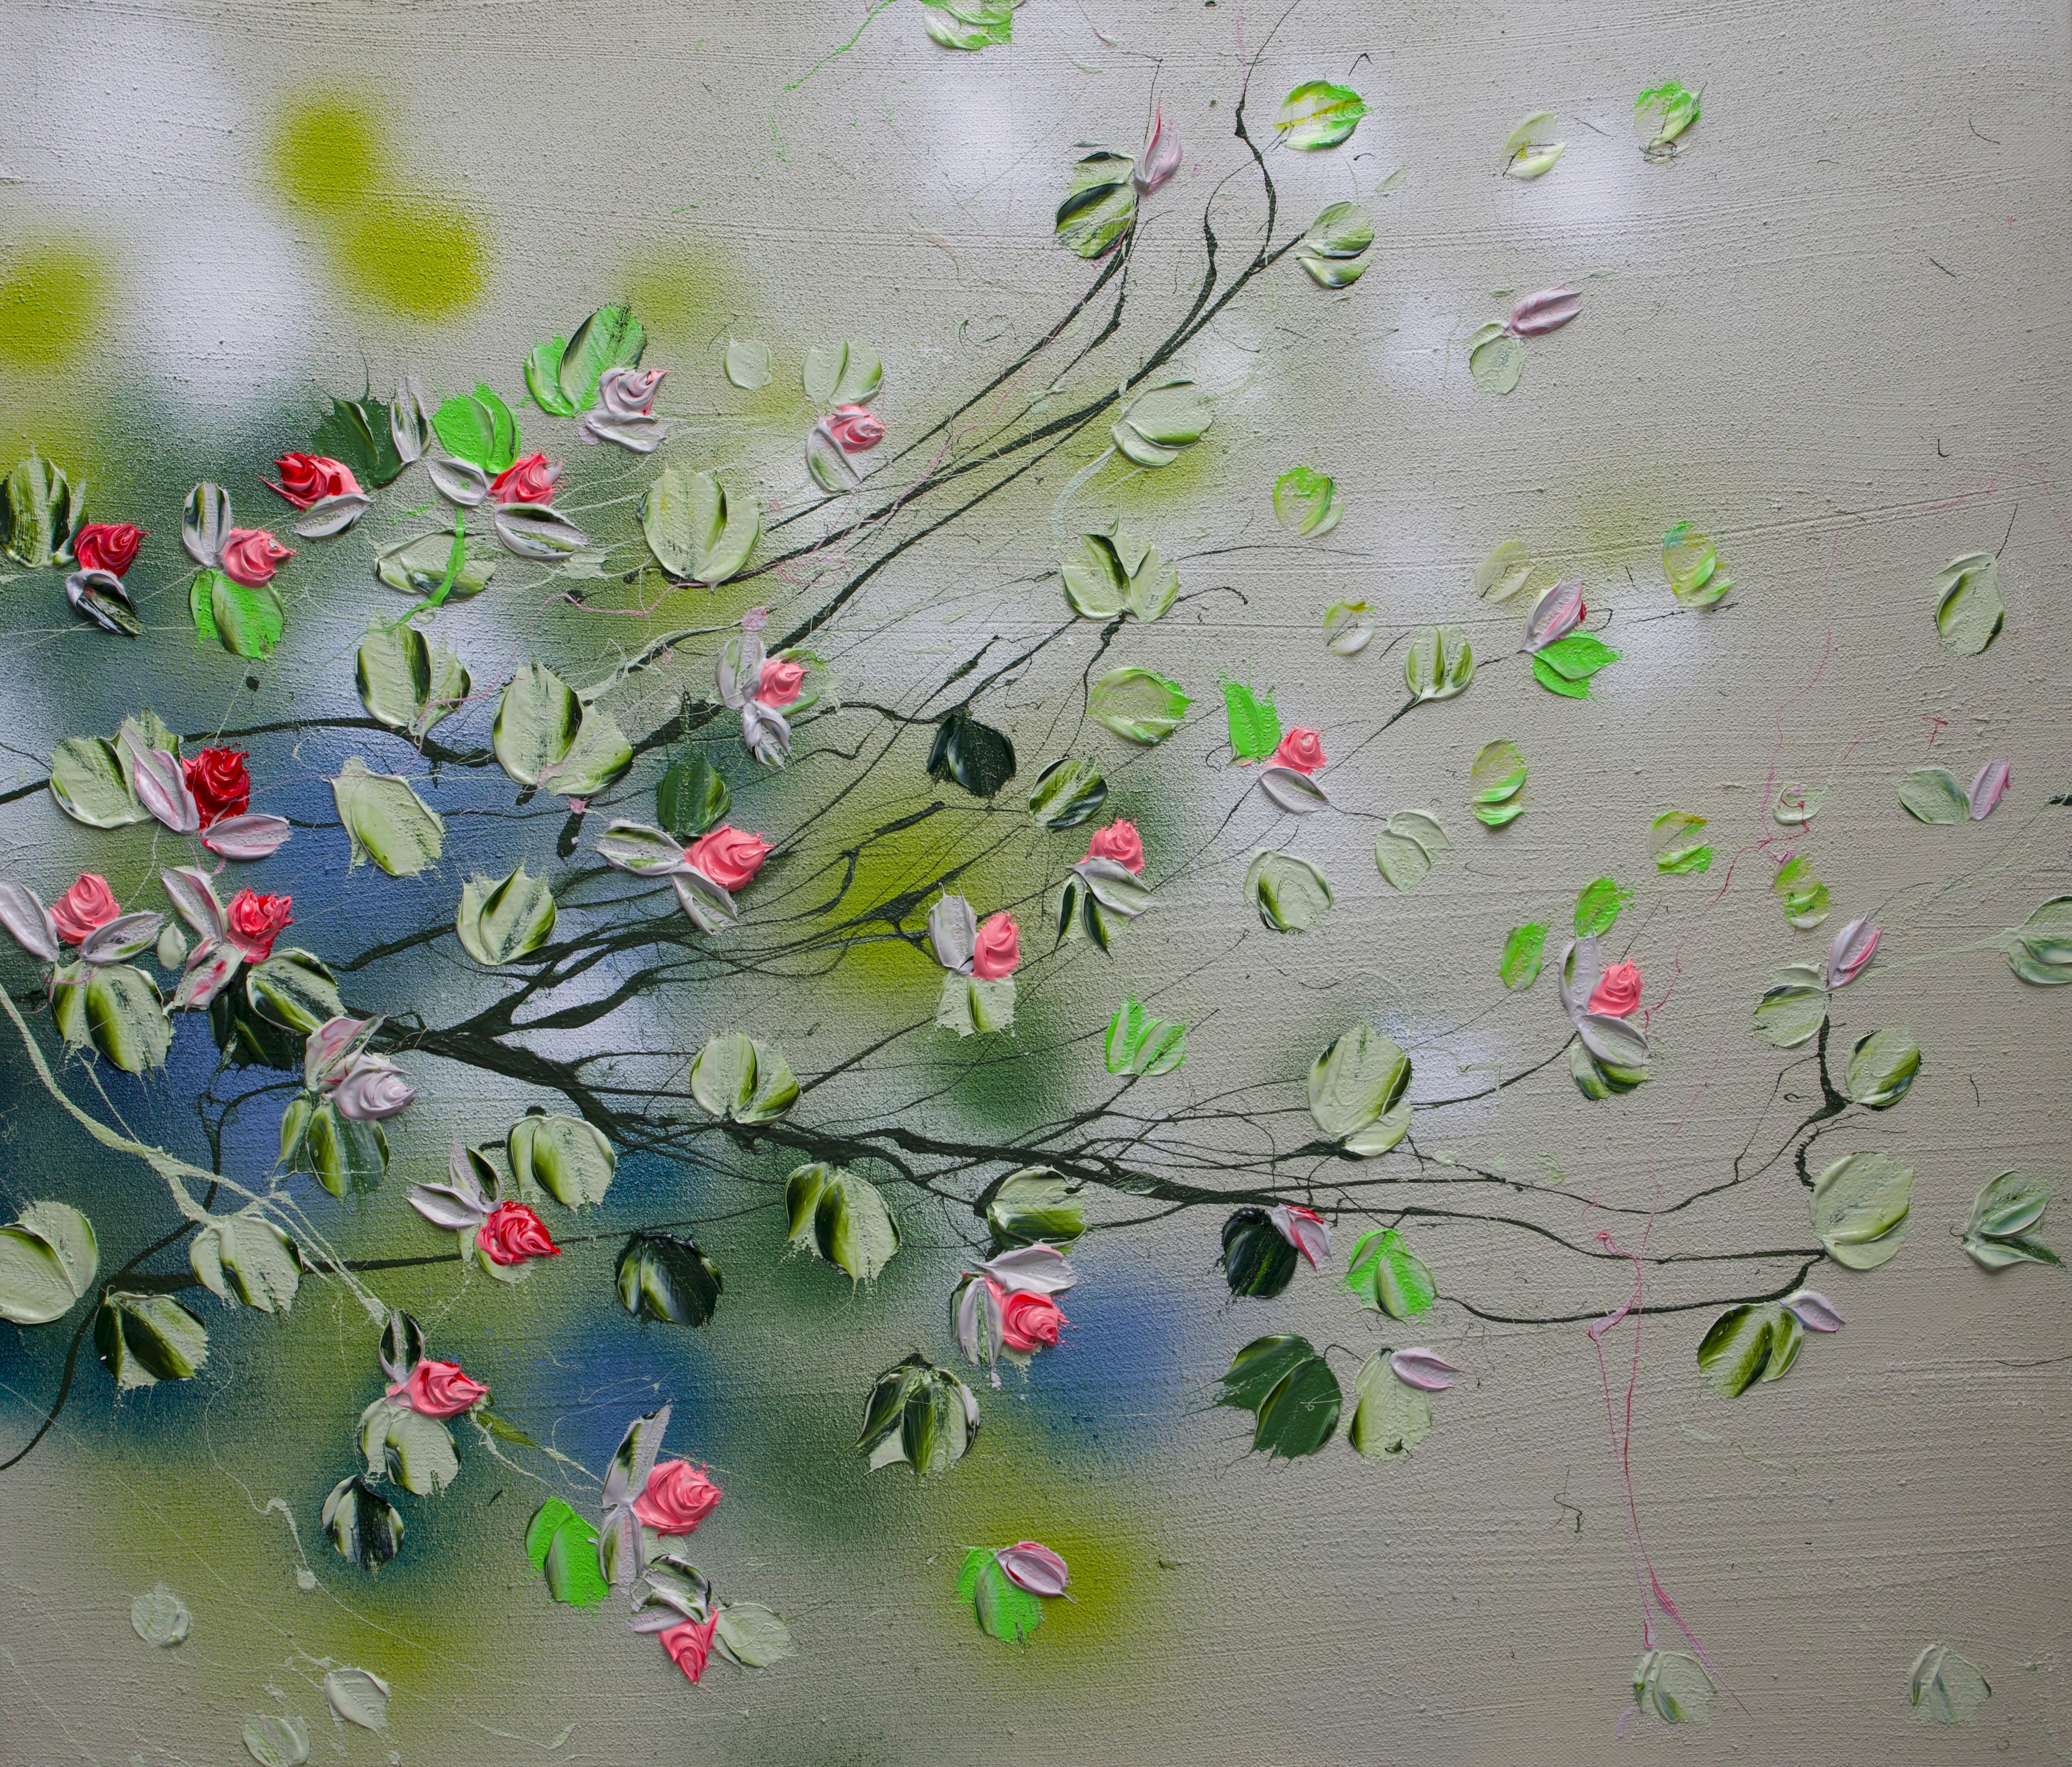 Textured colorful floral painting "Flower Talk"